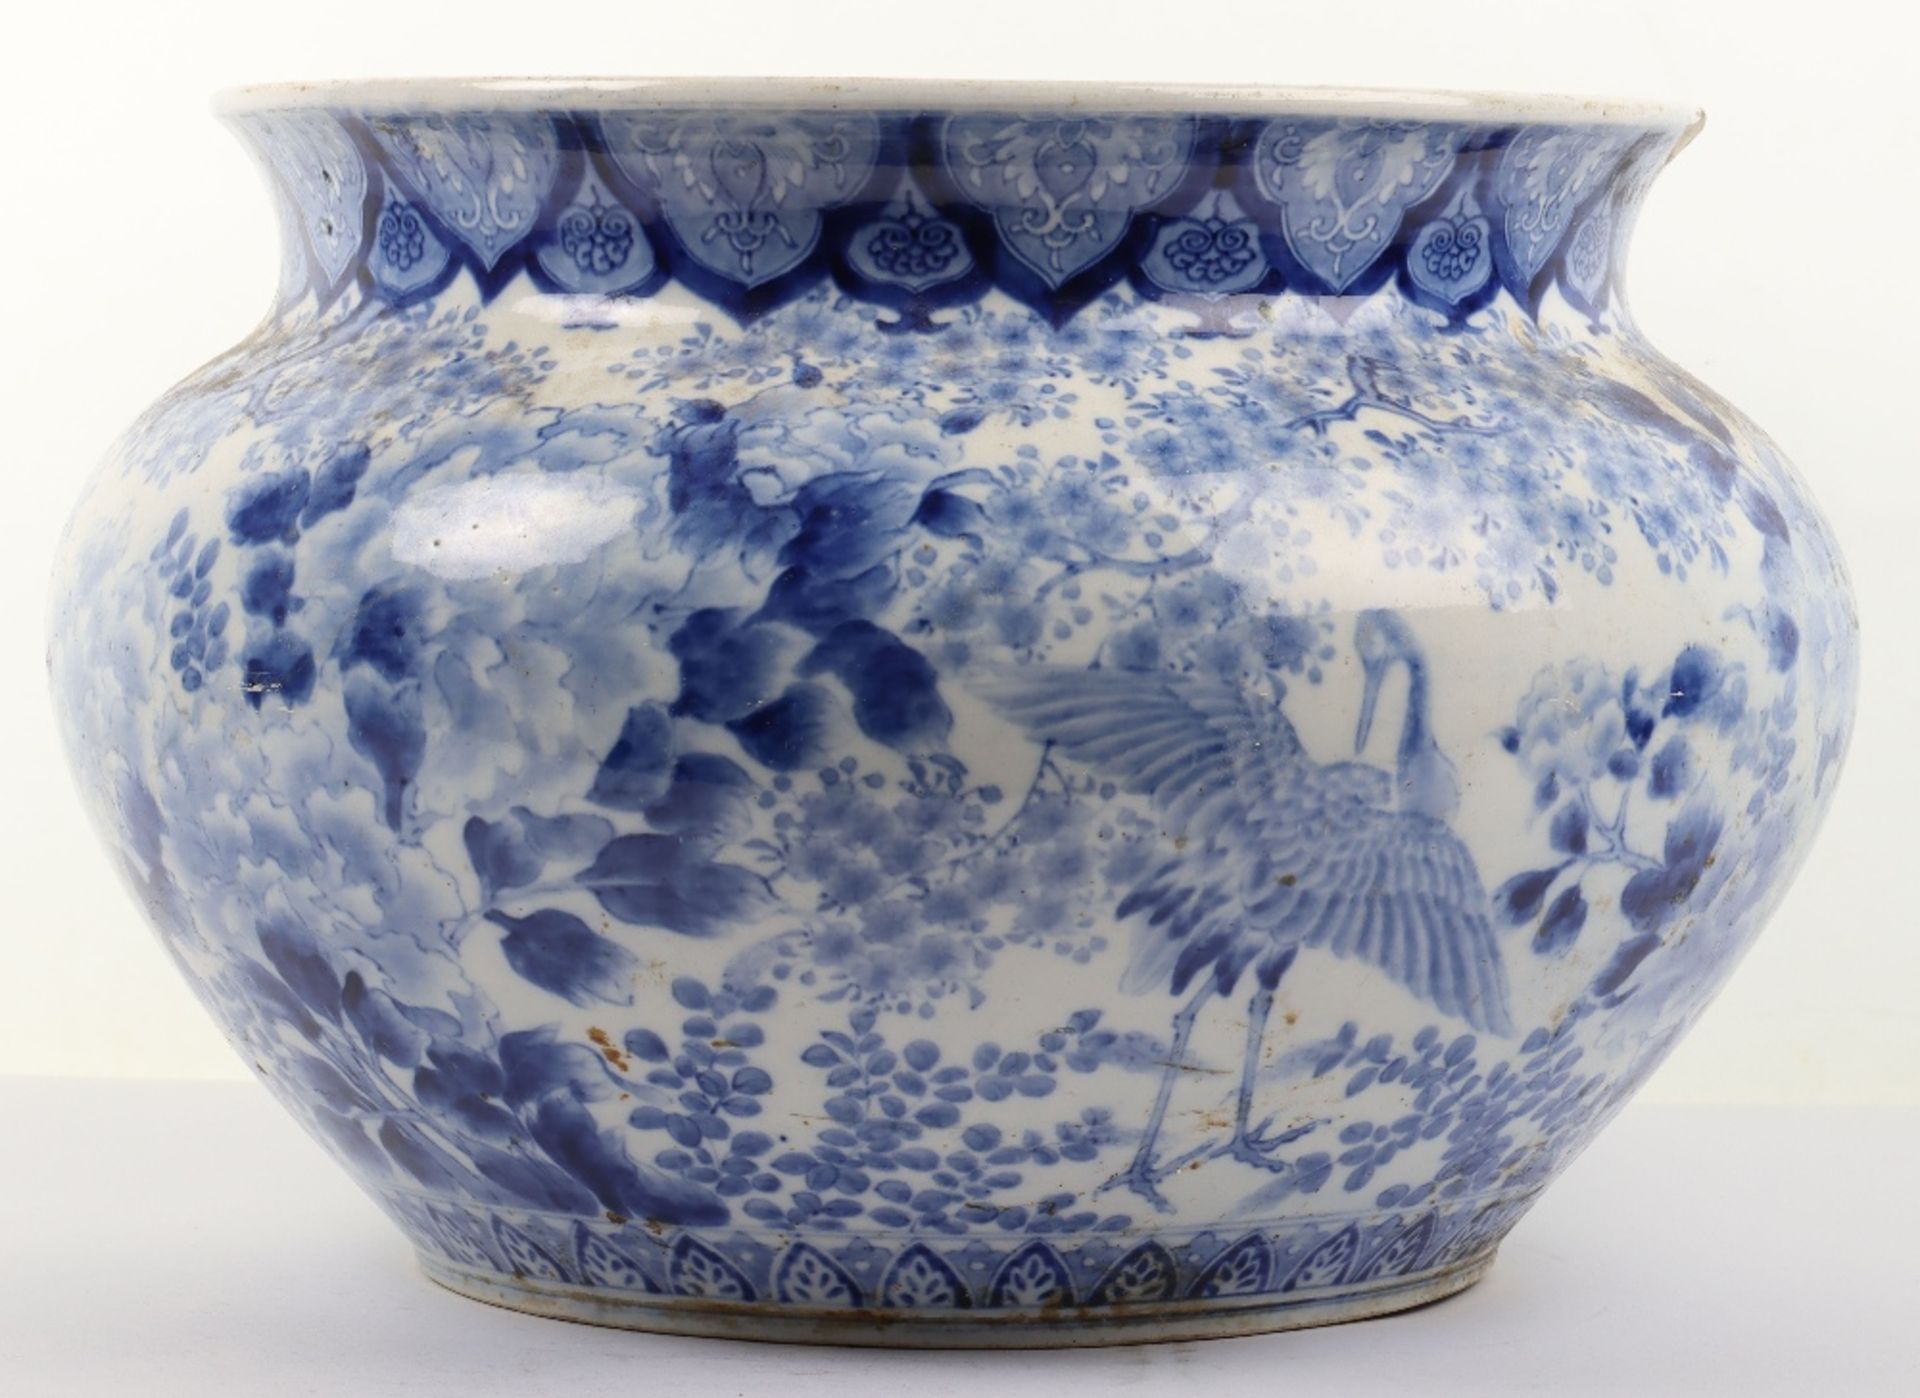 A Chinese blue & white fish bowl / jardiniere, unmarked